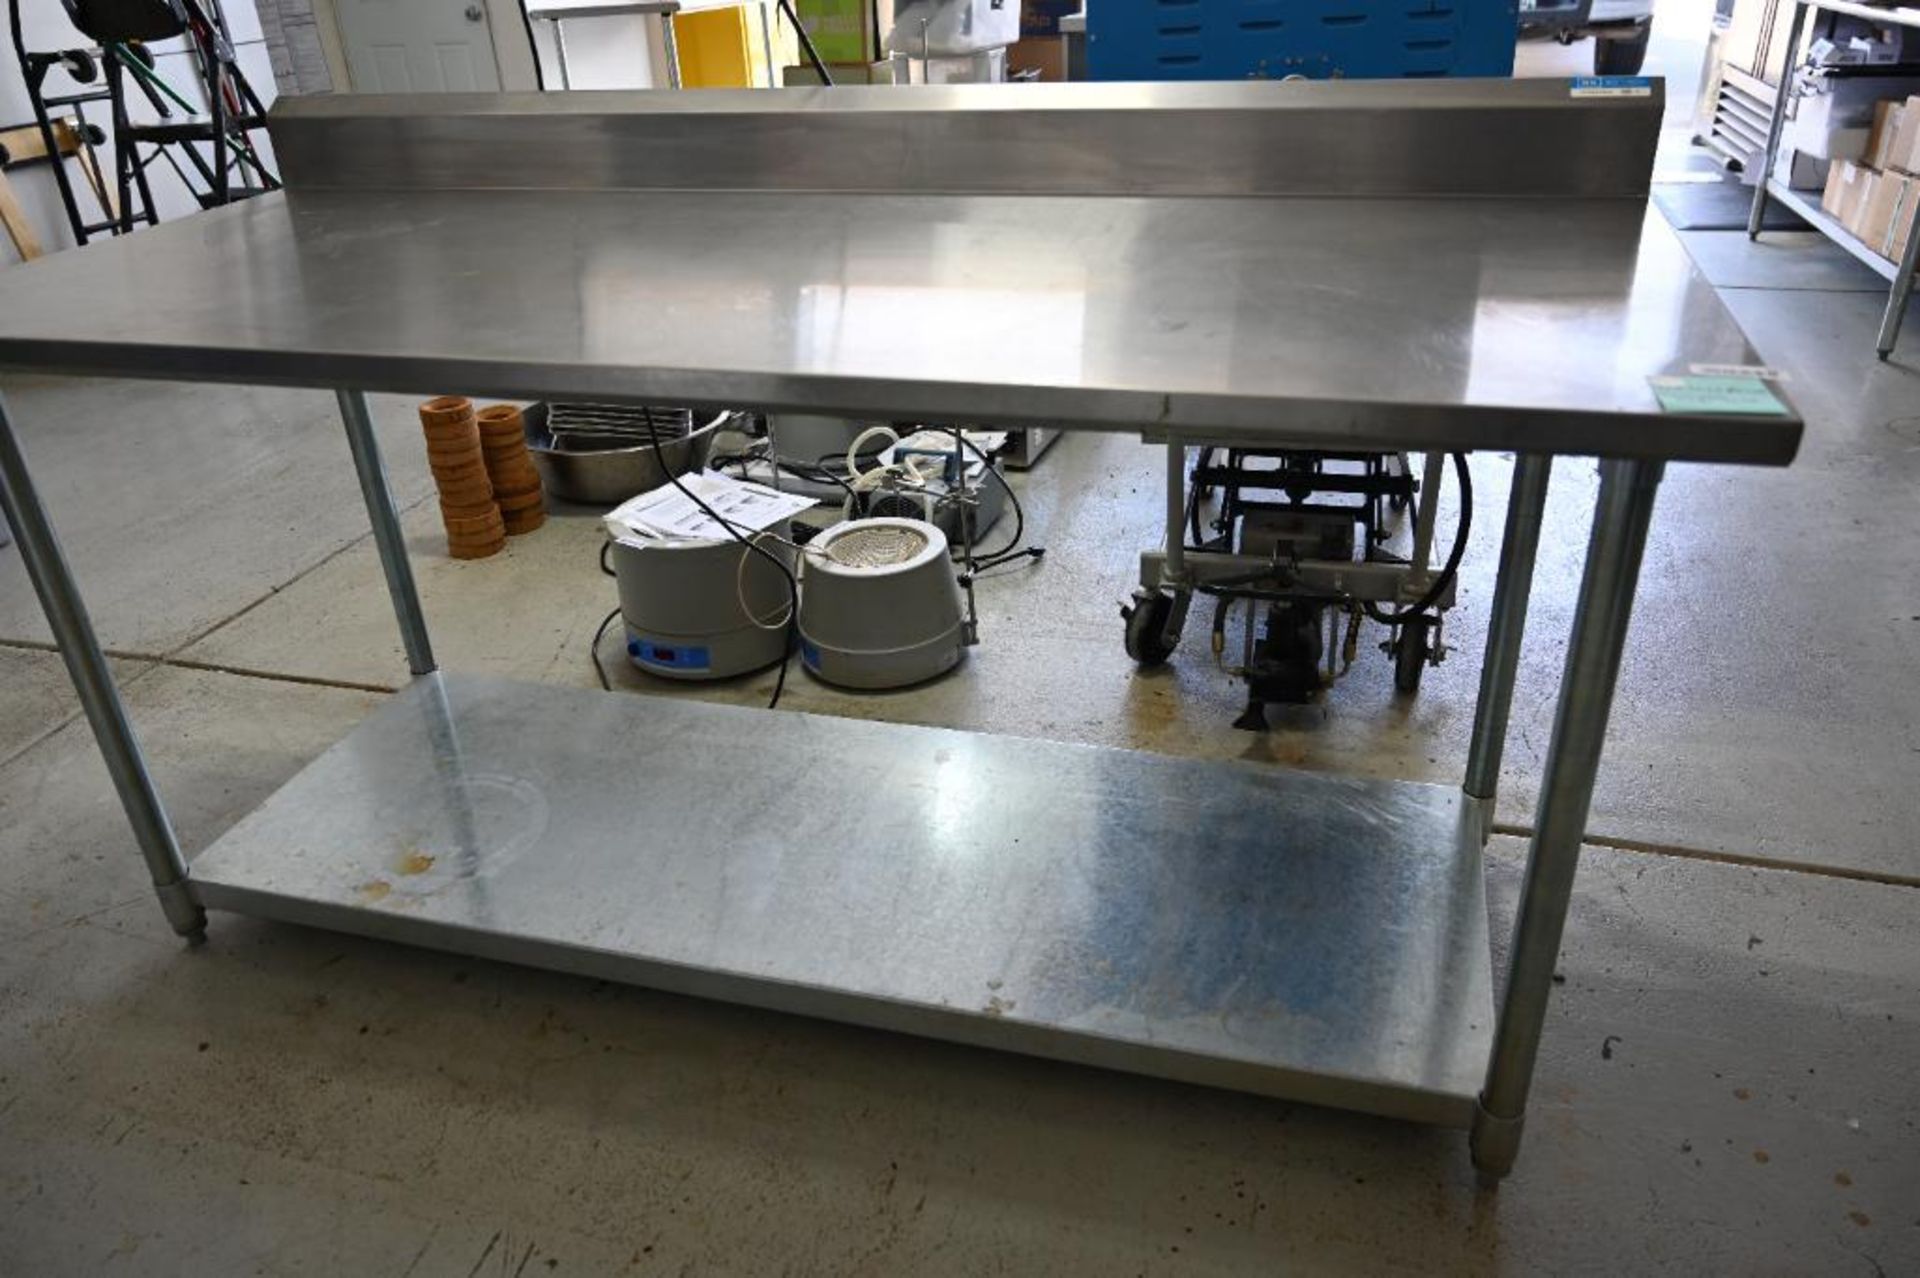 72" x 30.25"x 34.25" Stainless Steel Work Table with Back splash - Image 5 of 6